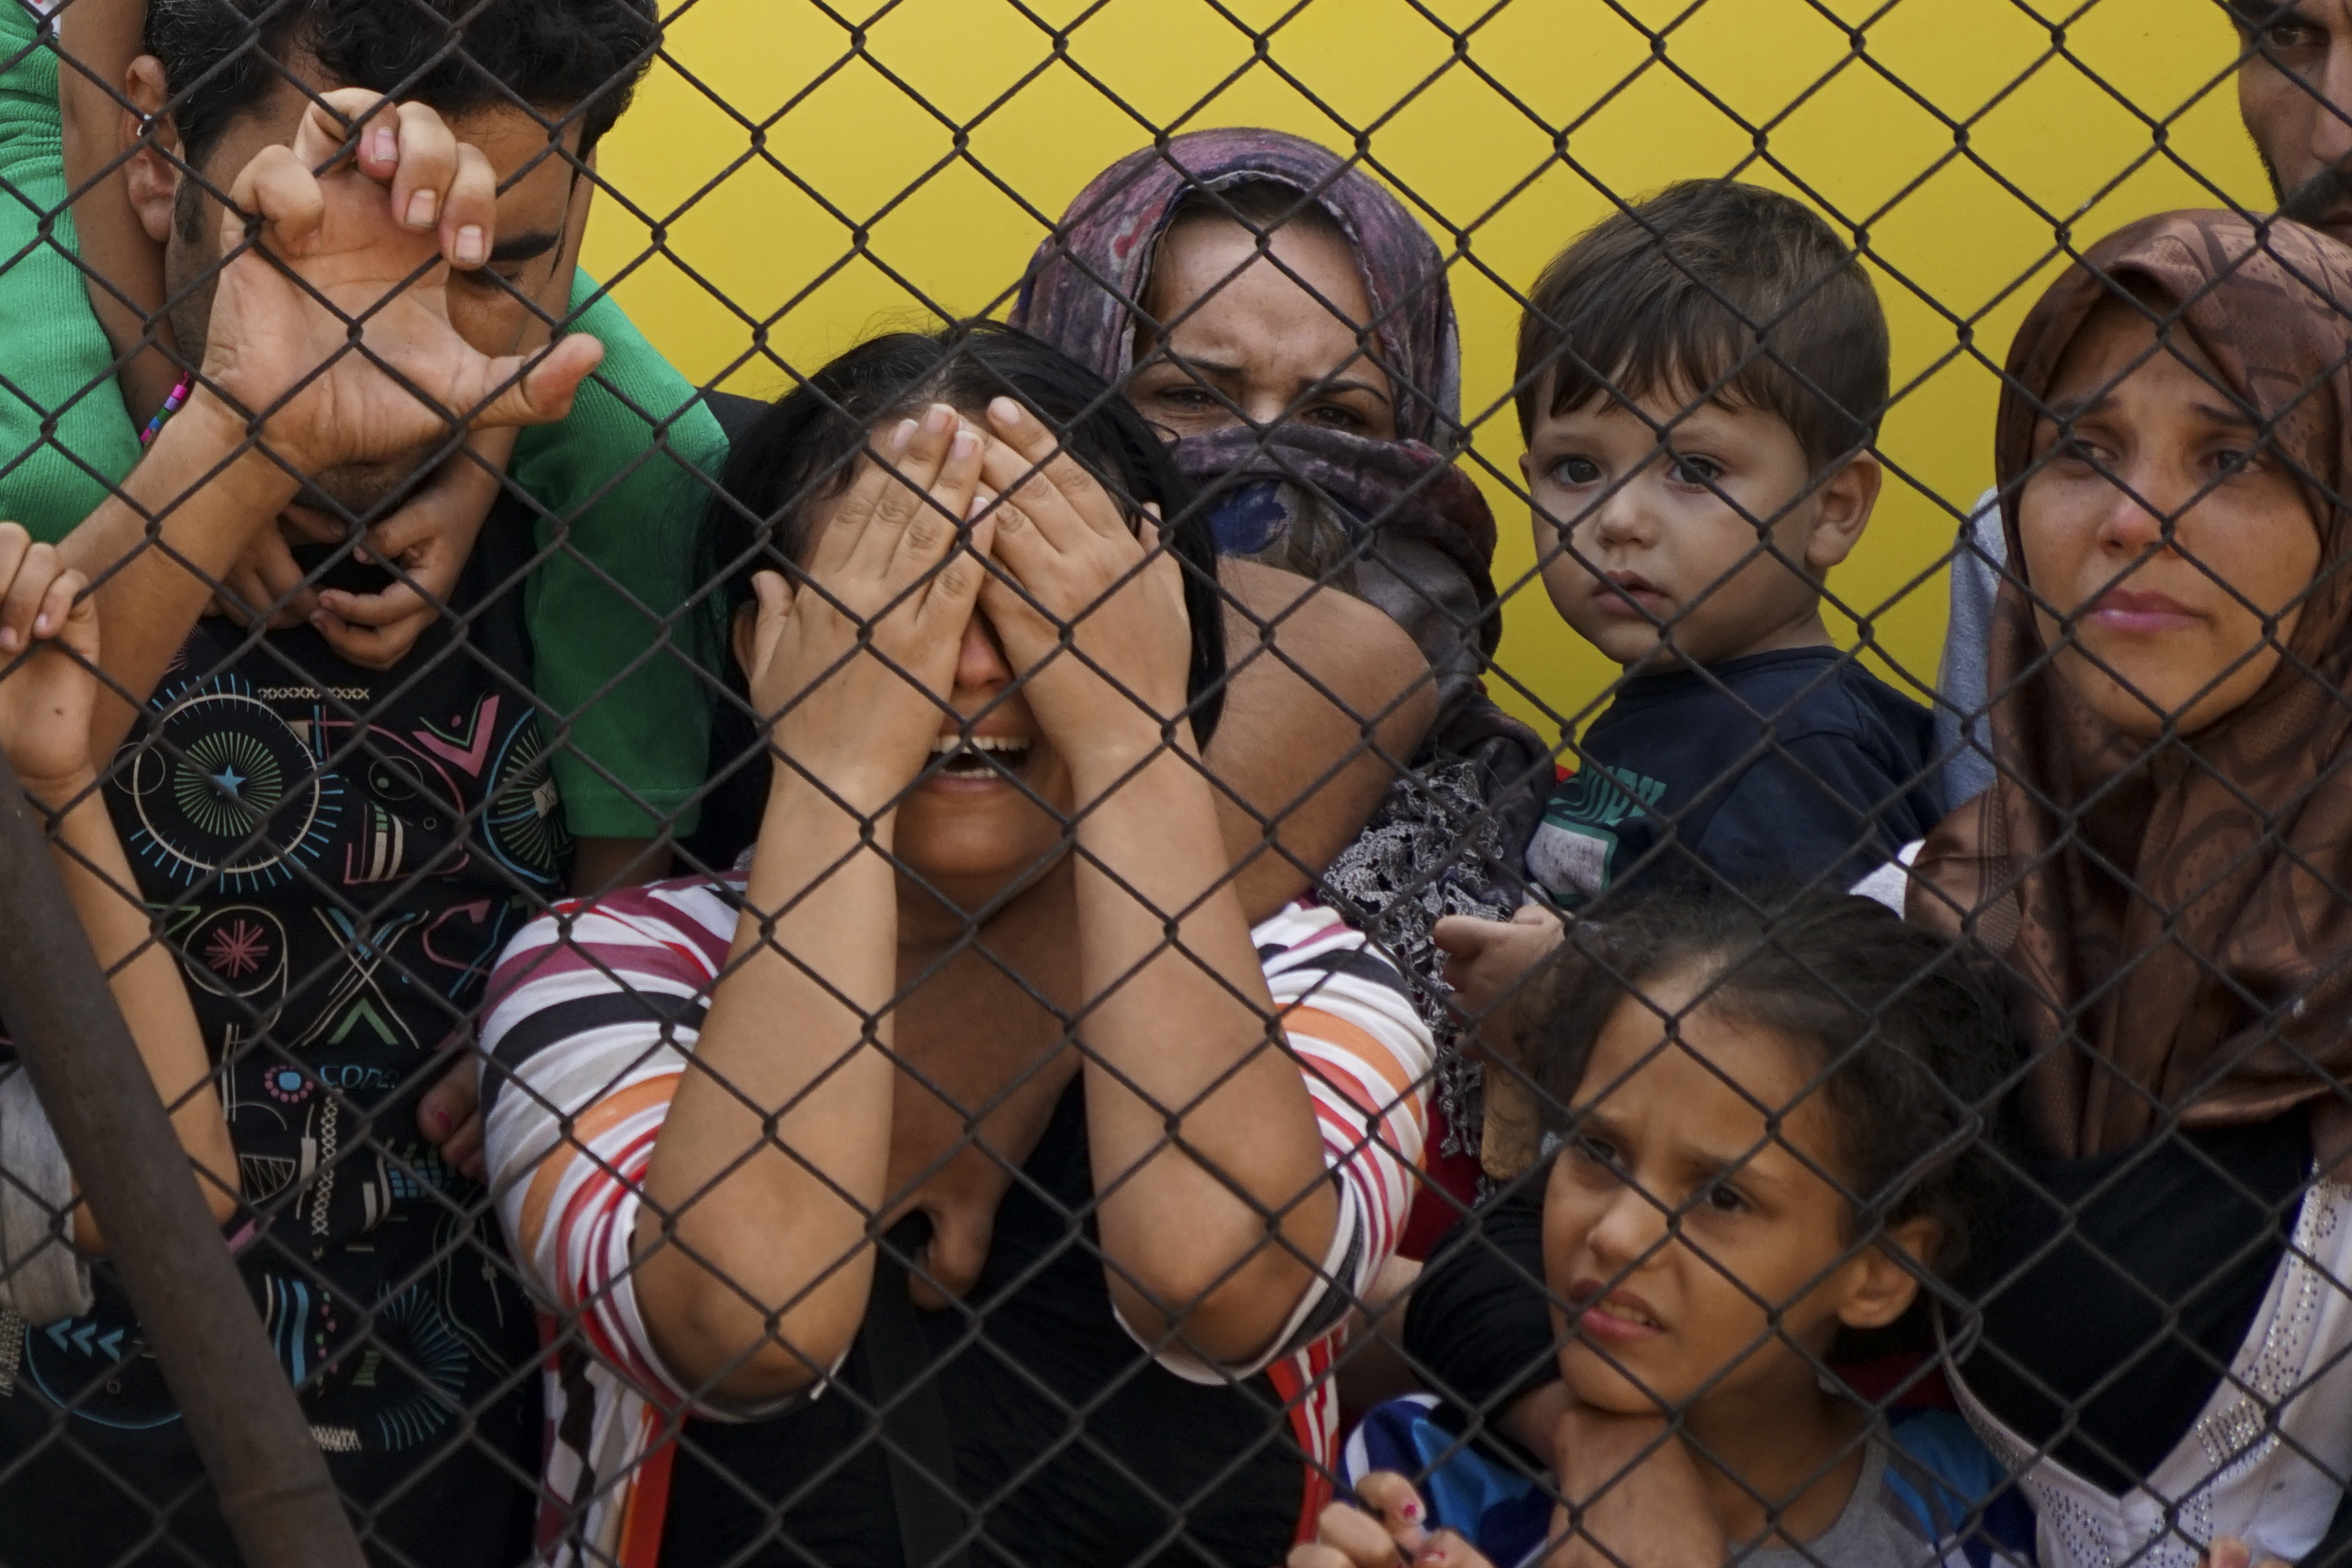 A group of children, women and a young man behind a chain link fence, one woman with hands over her eyes, wailing